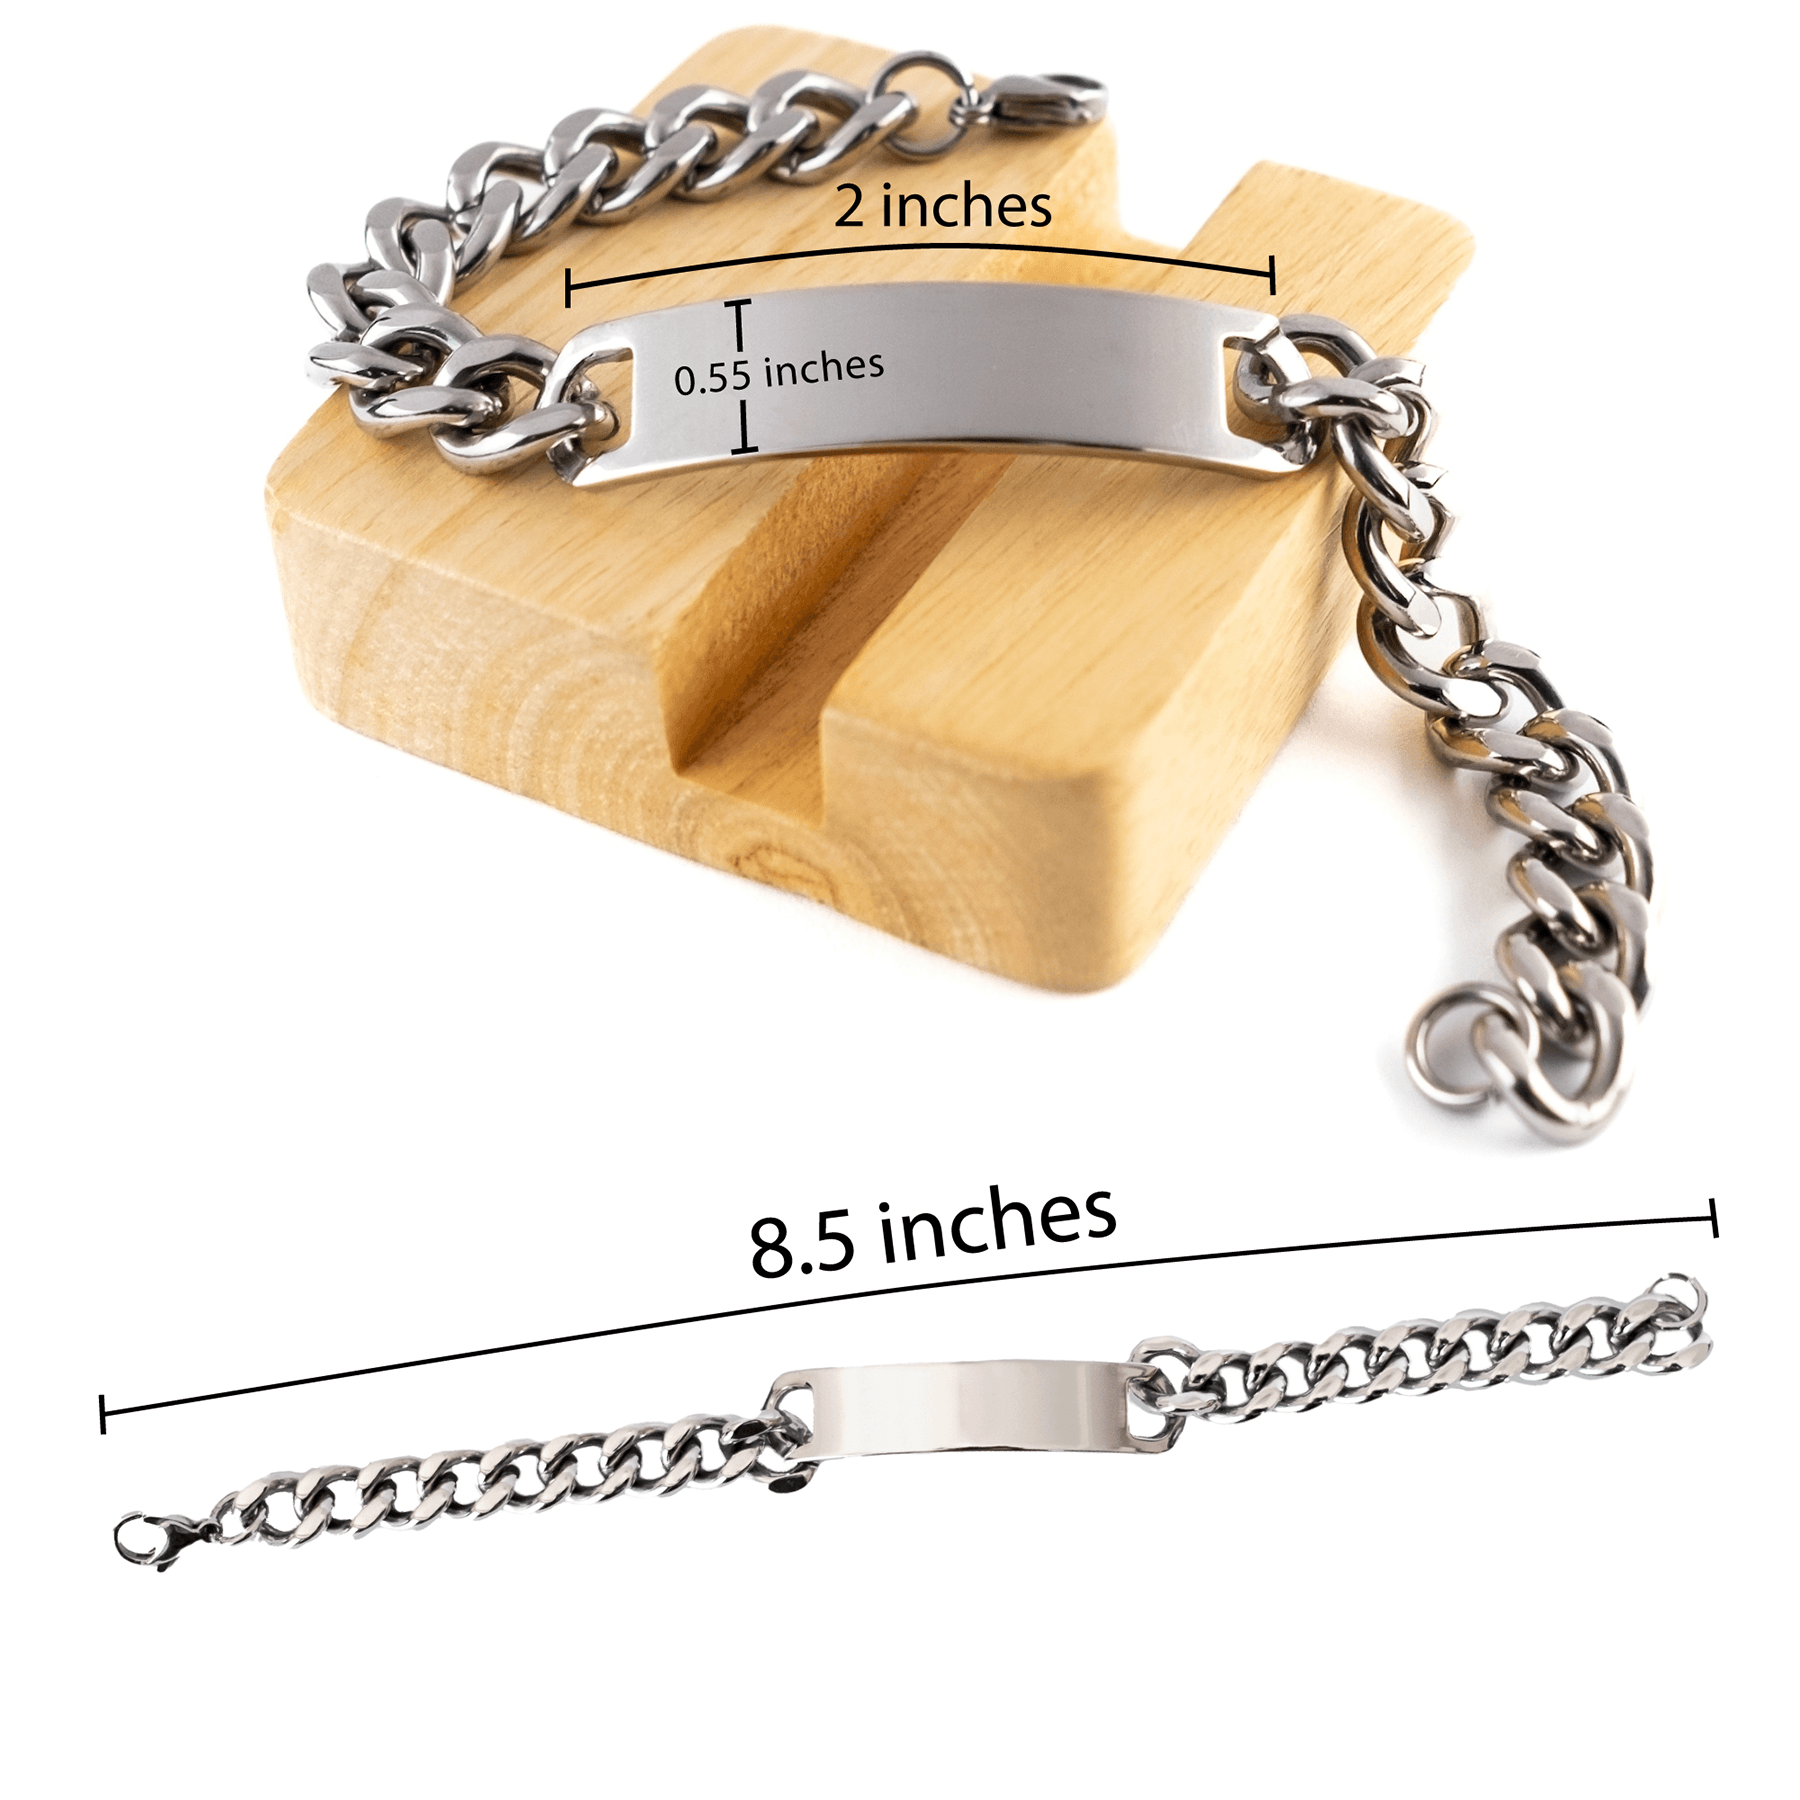 Paramedic Cuban Chain Link Engraved Bracelet - Thanks for being who you are - Birthday Christmas Jewelry Gifts Coworkers Colleague Boss - Mallard Moon Gift Shop